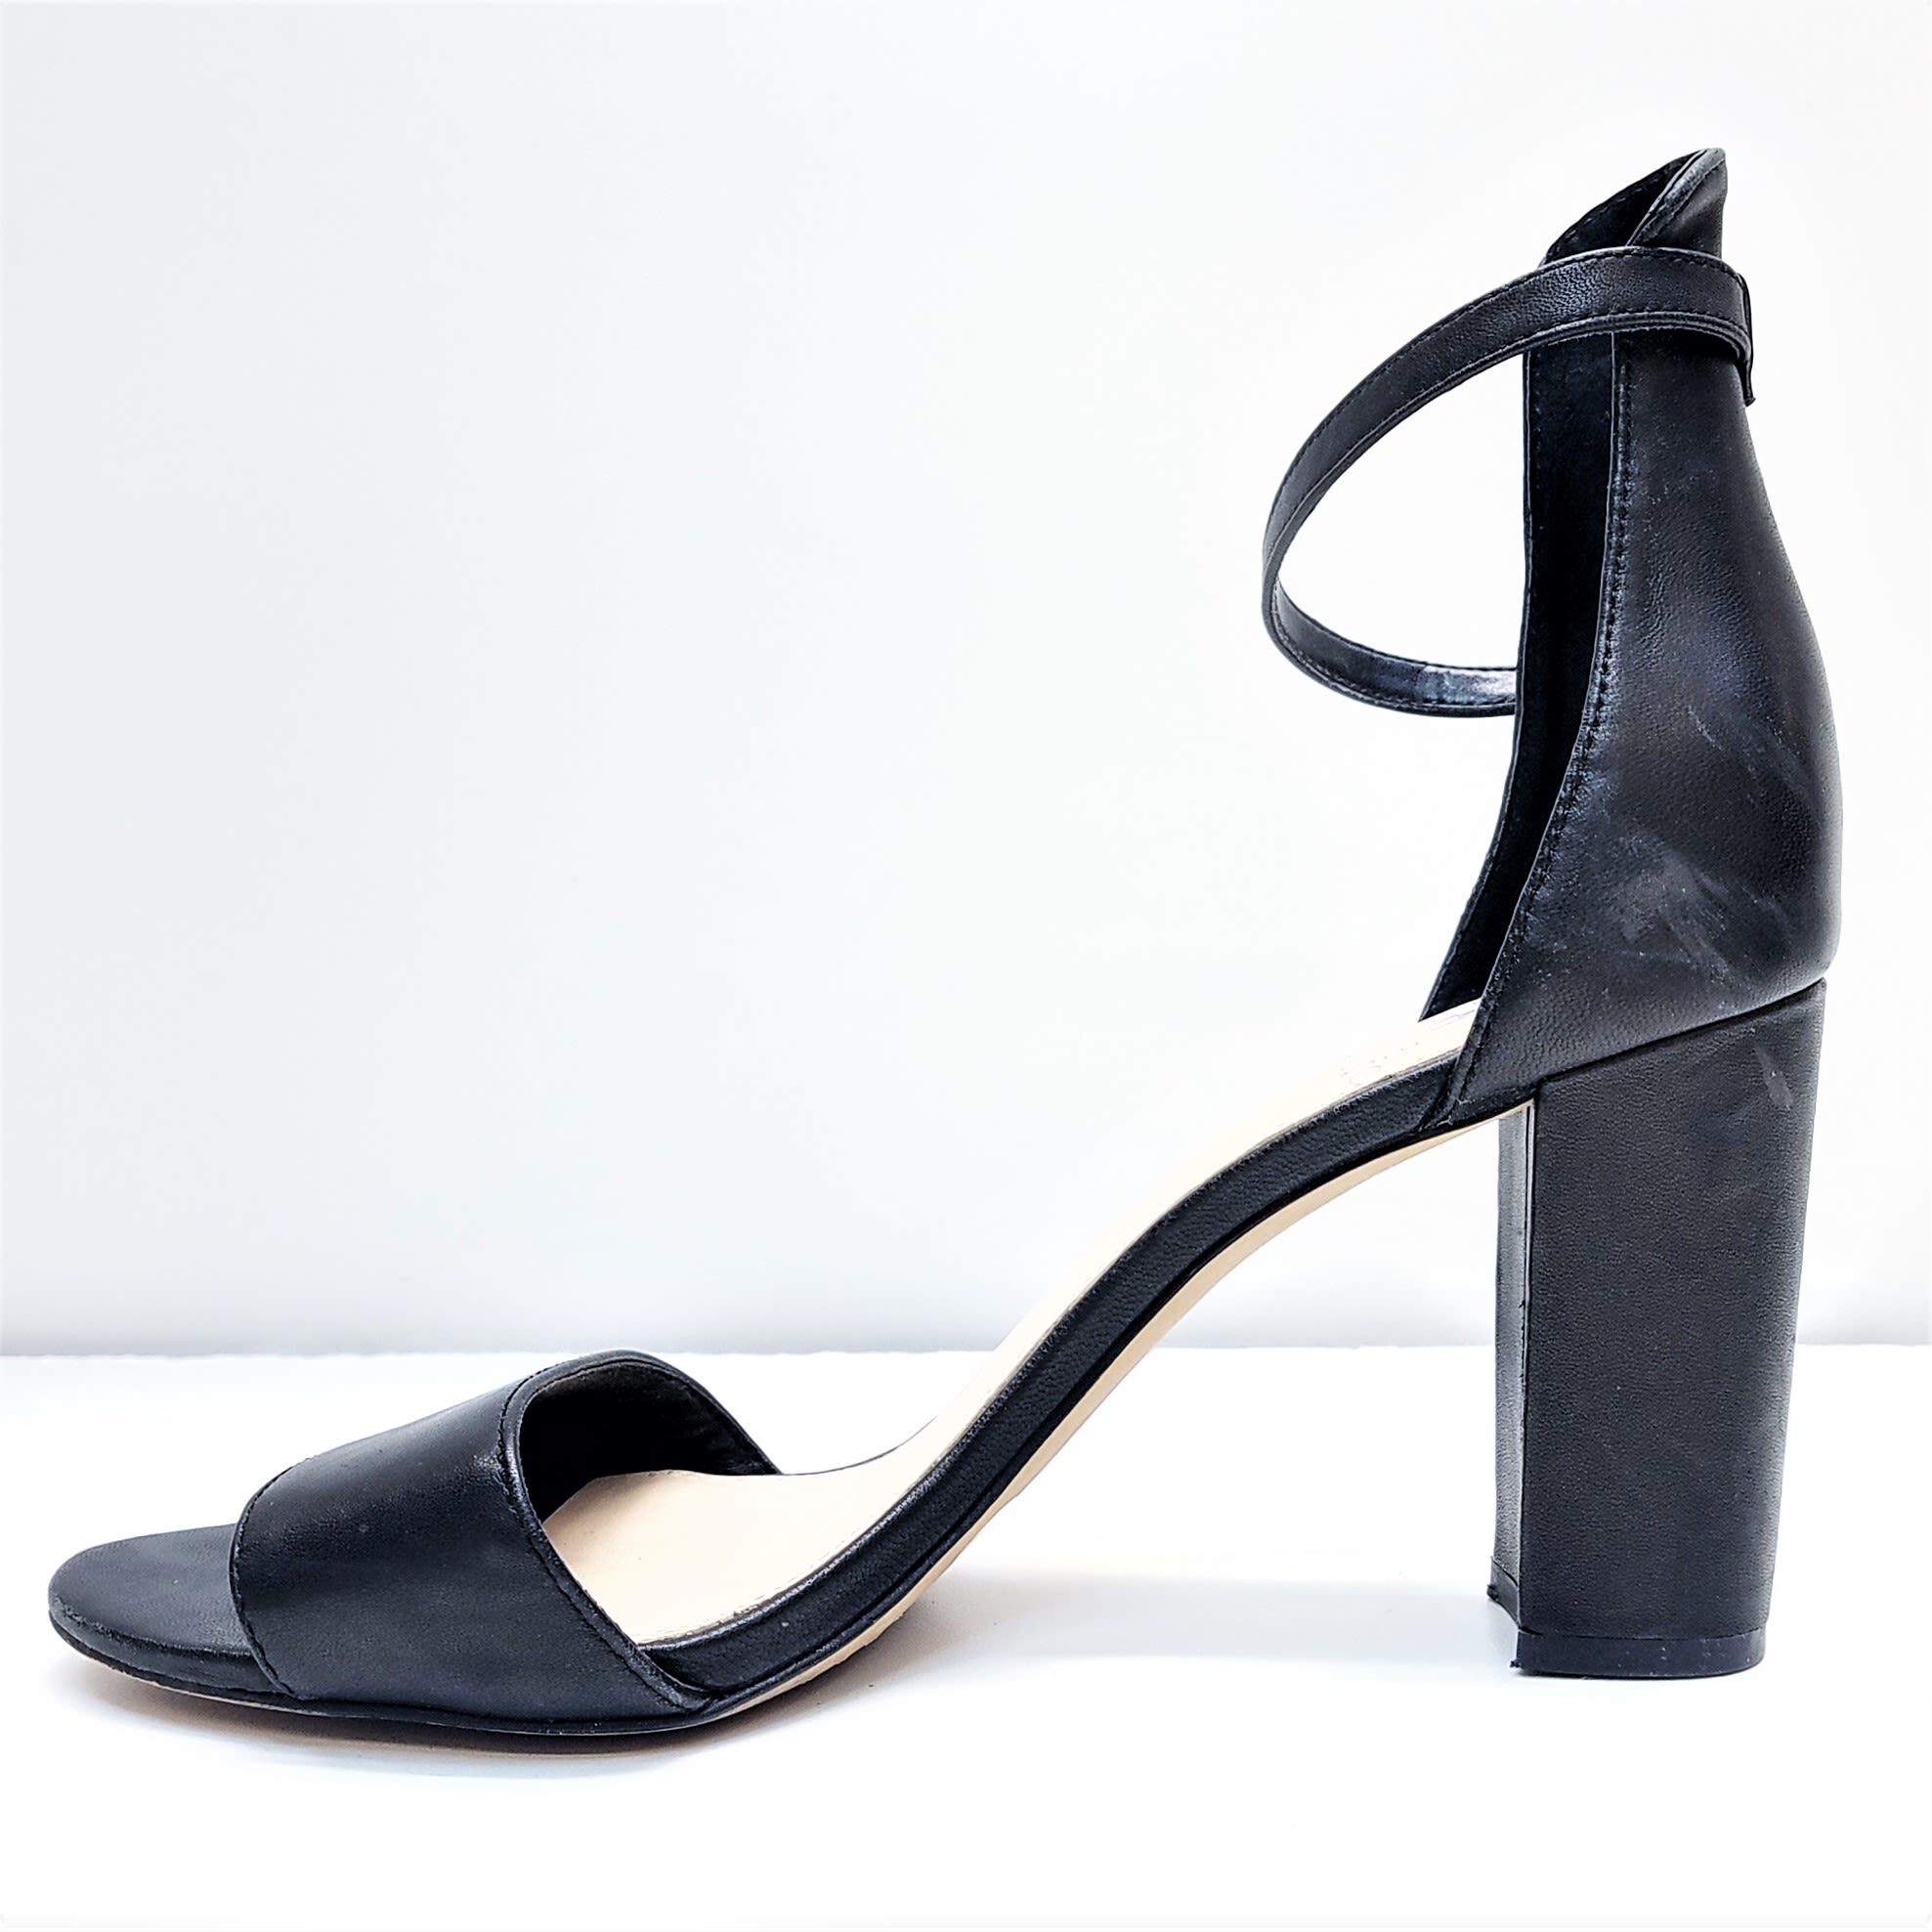 Black Patent Patent Ankle Strap Heeled Sandals - CHARLES & KEITH IN